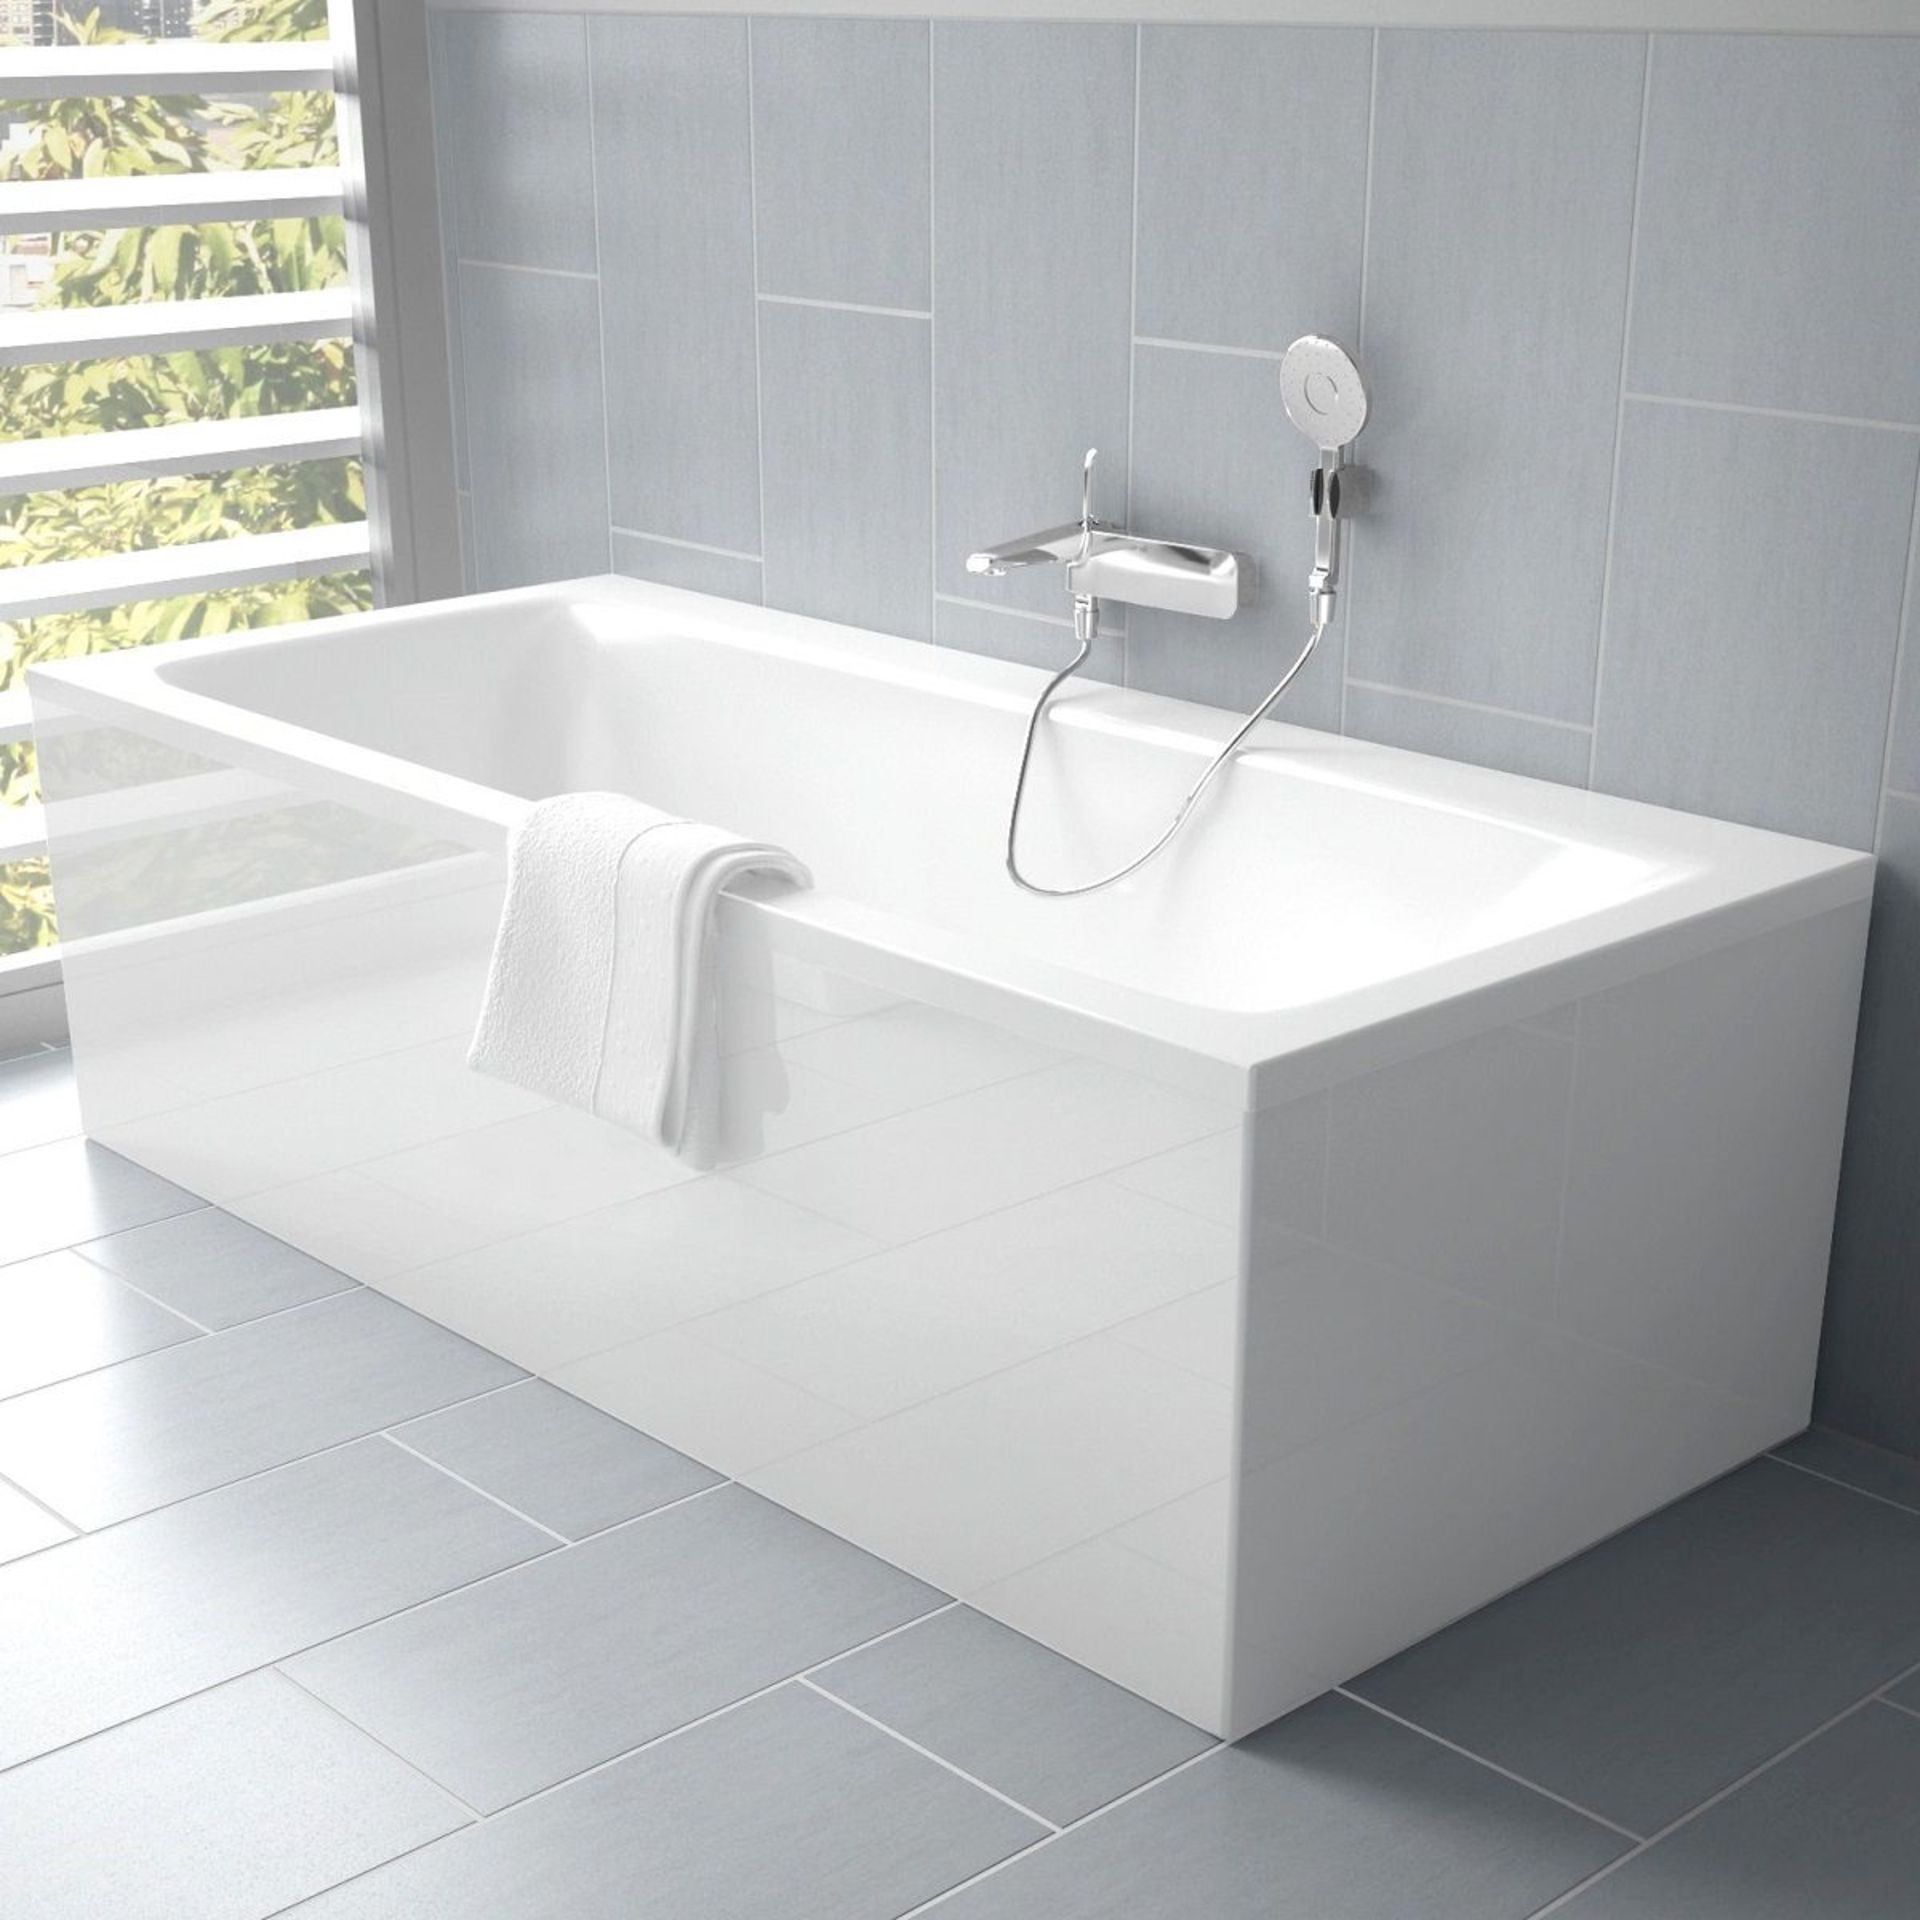 (UR5) 2000x900mm Keramag Deep Double Ended Bath. RRP £997.99. Our range of double ended baths... - Image 4 of 4